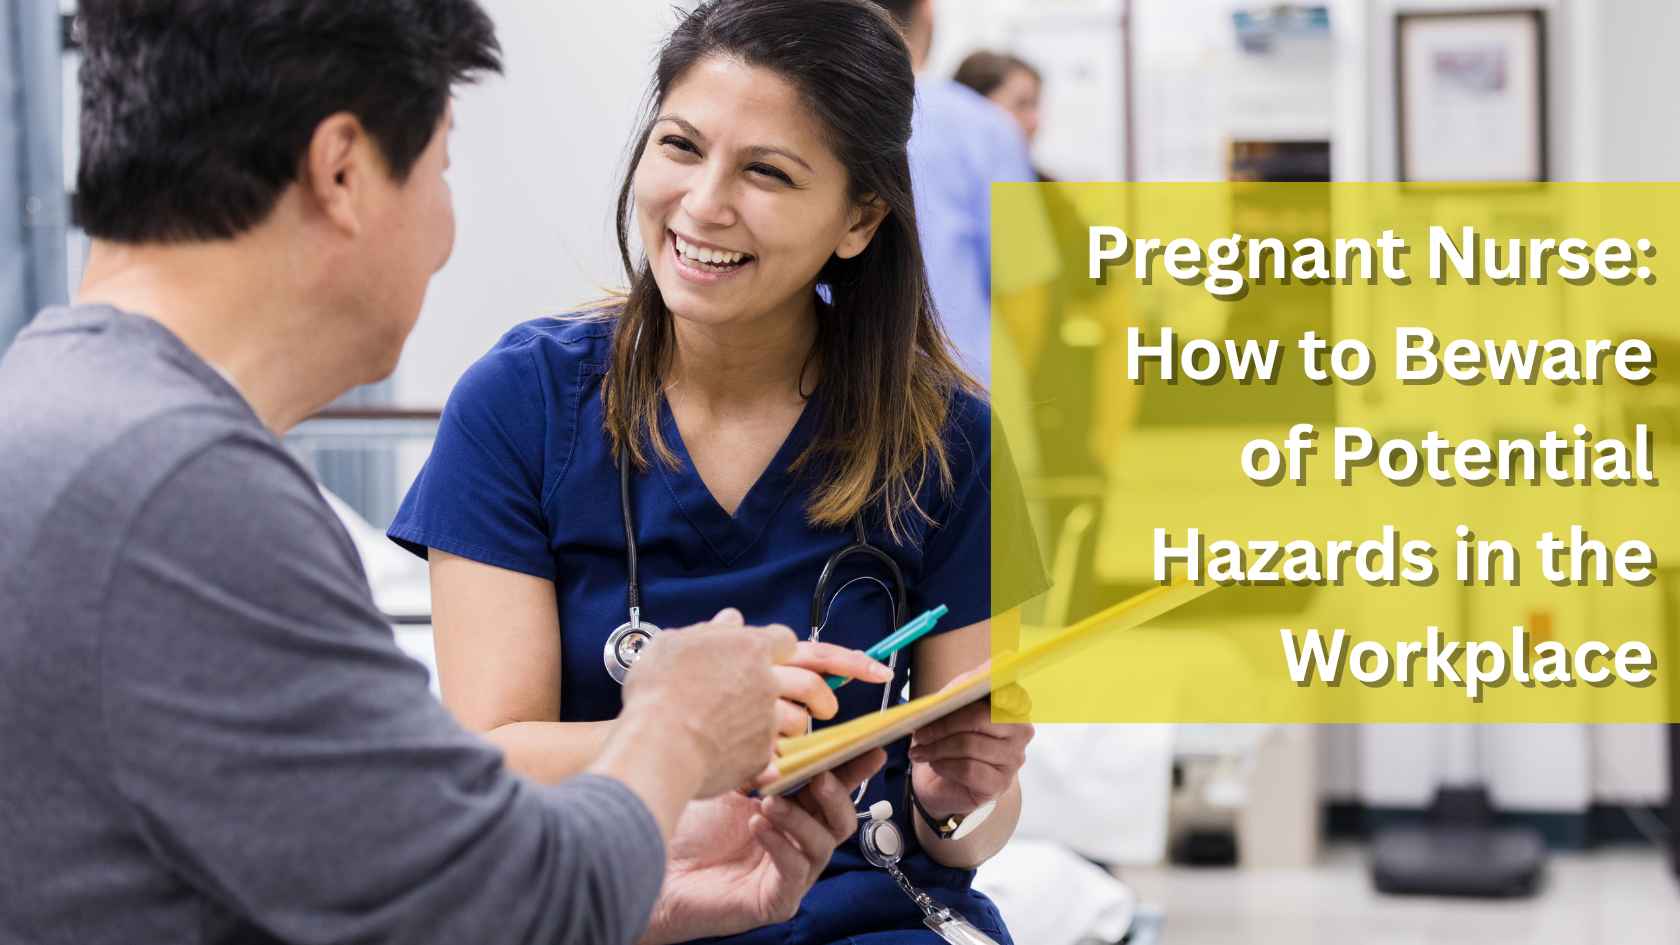 Pregnant Nurse: How to Beware of Potential Hazards in the Workplace?